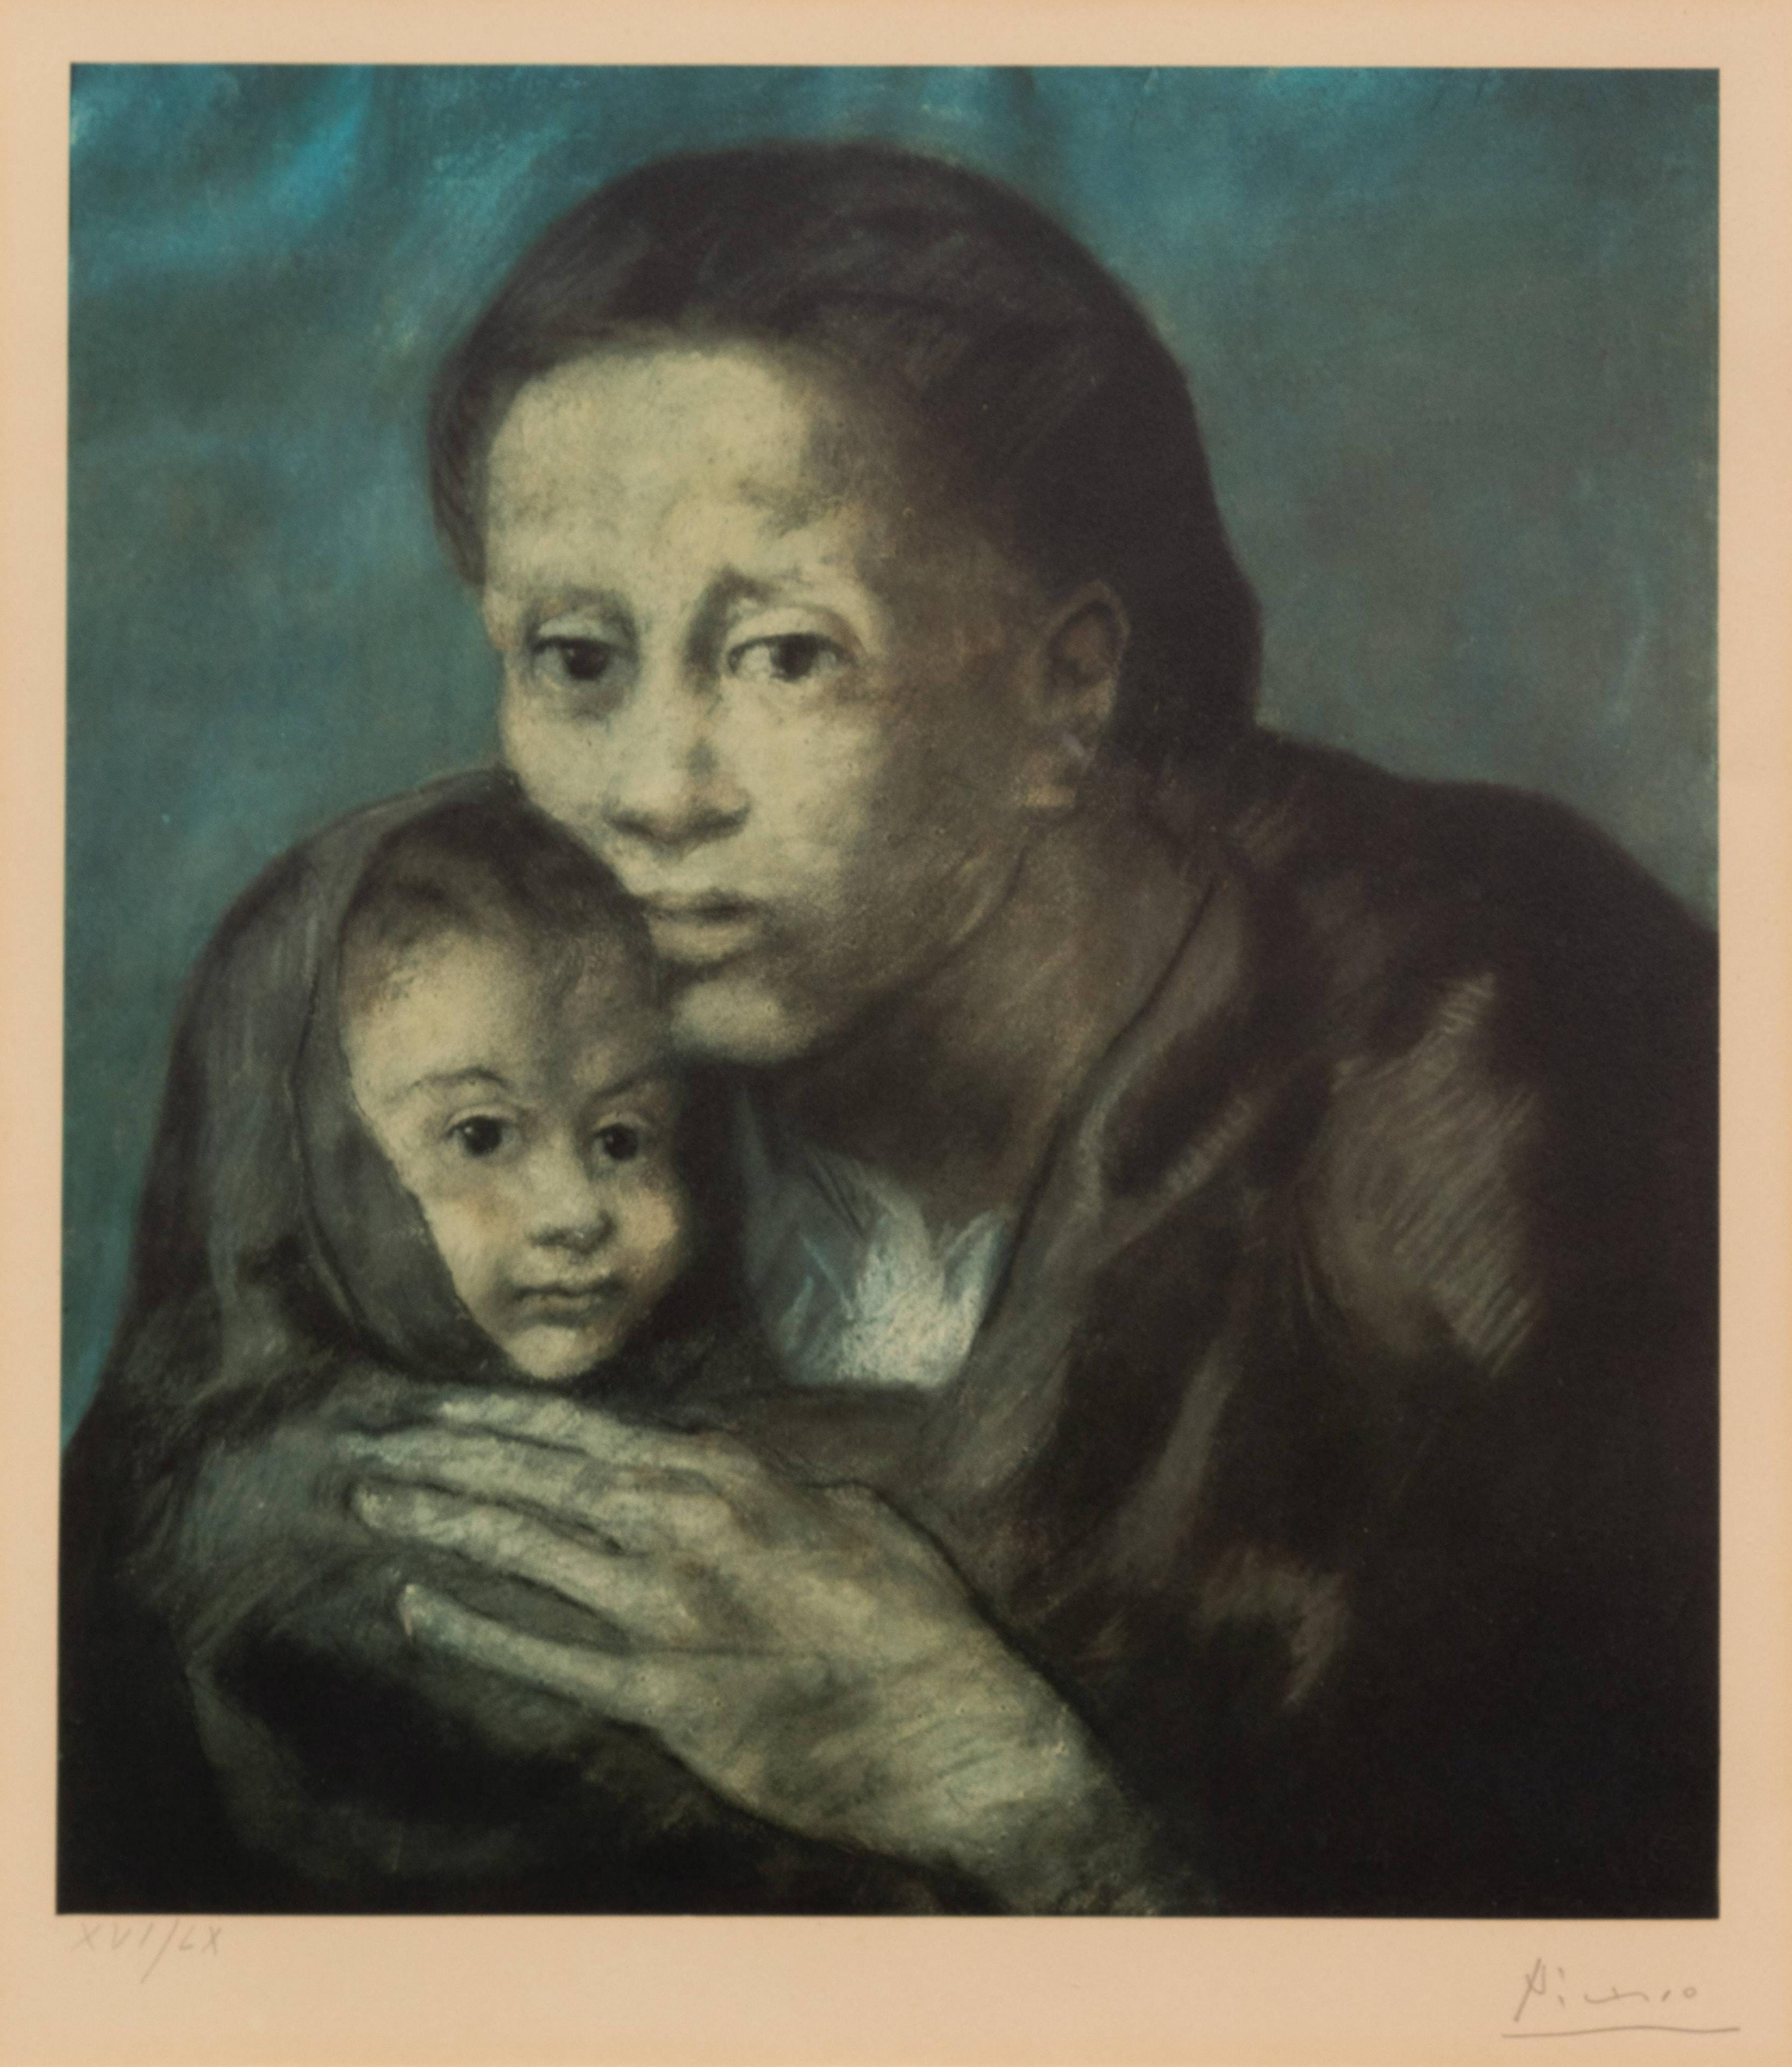 Mere et enfant au fichu (Mother and Child with Shawl) (from the Barcelona Suite) (after) (Czwiklitzer 231)